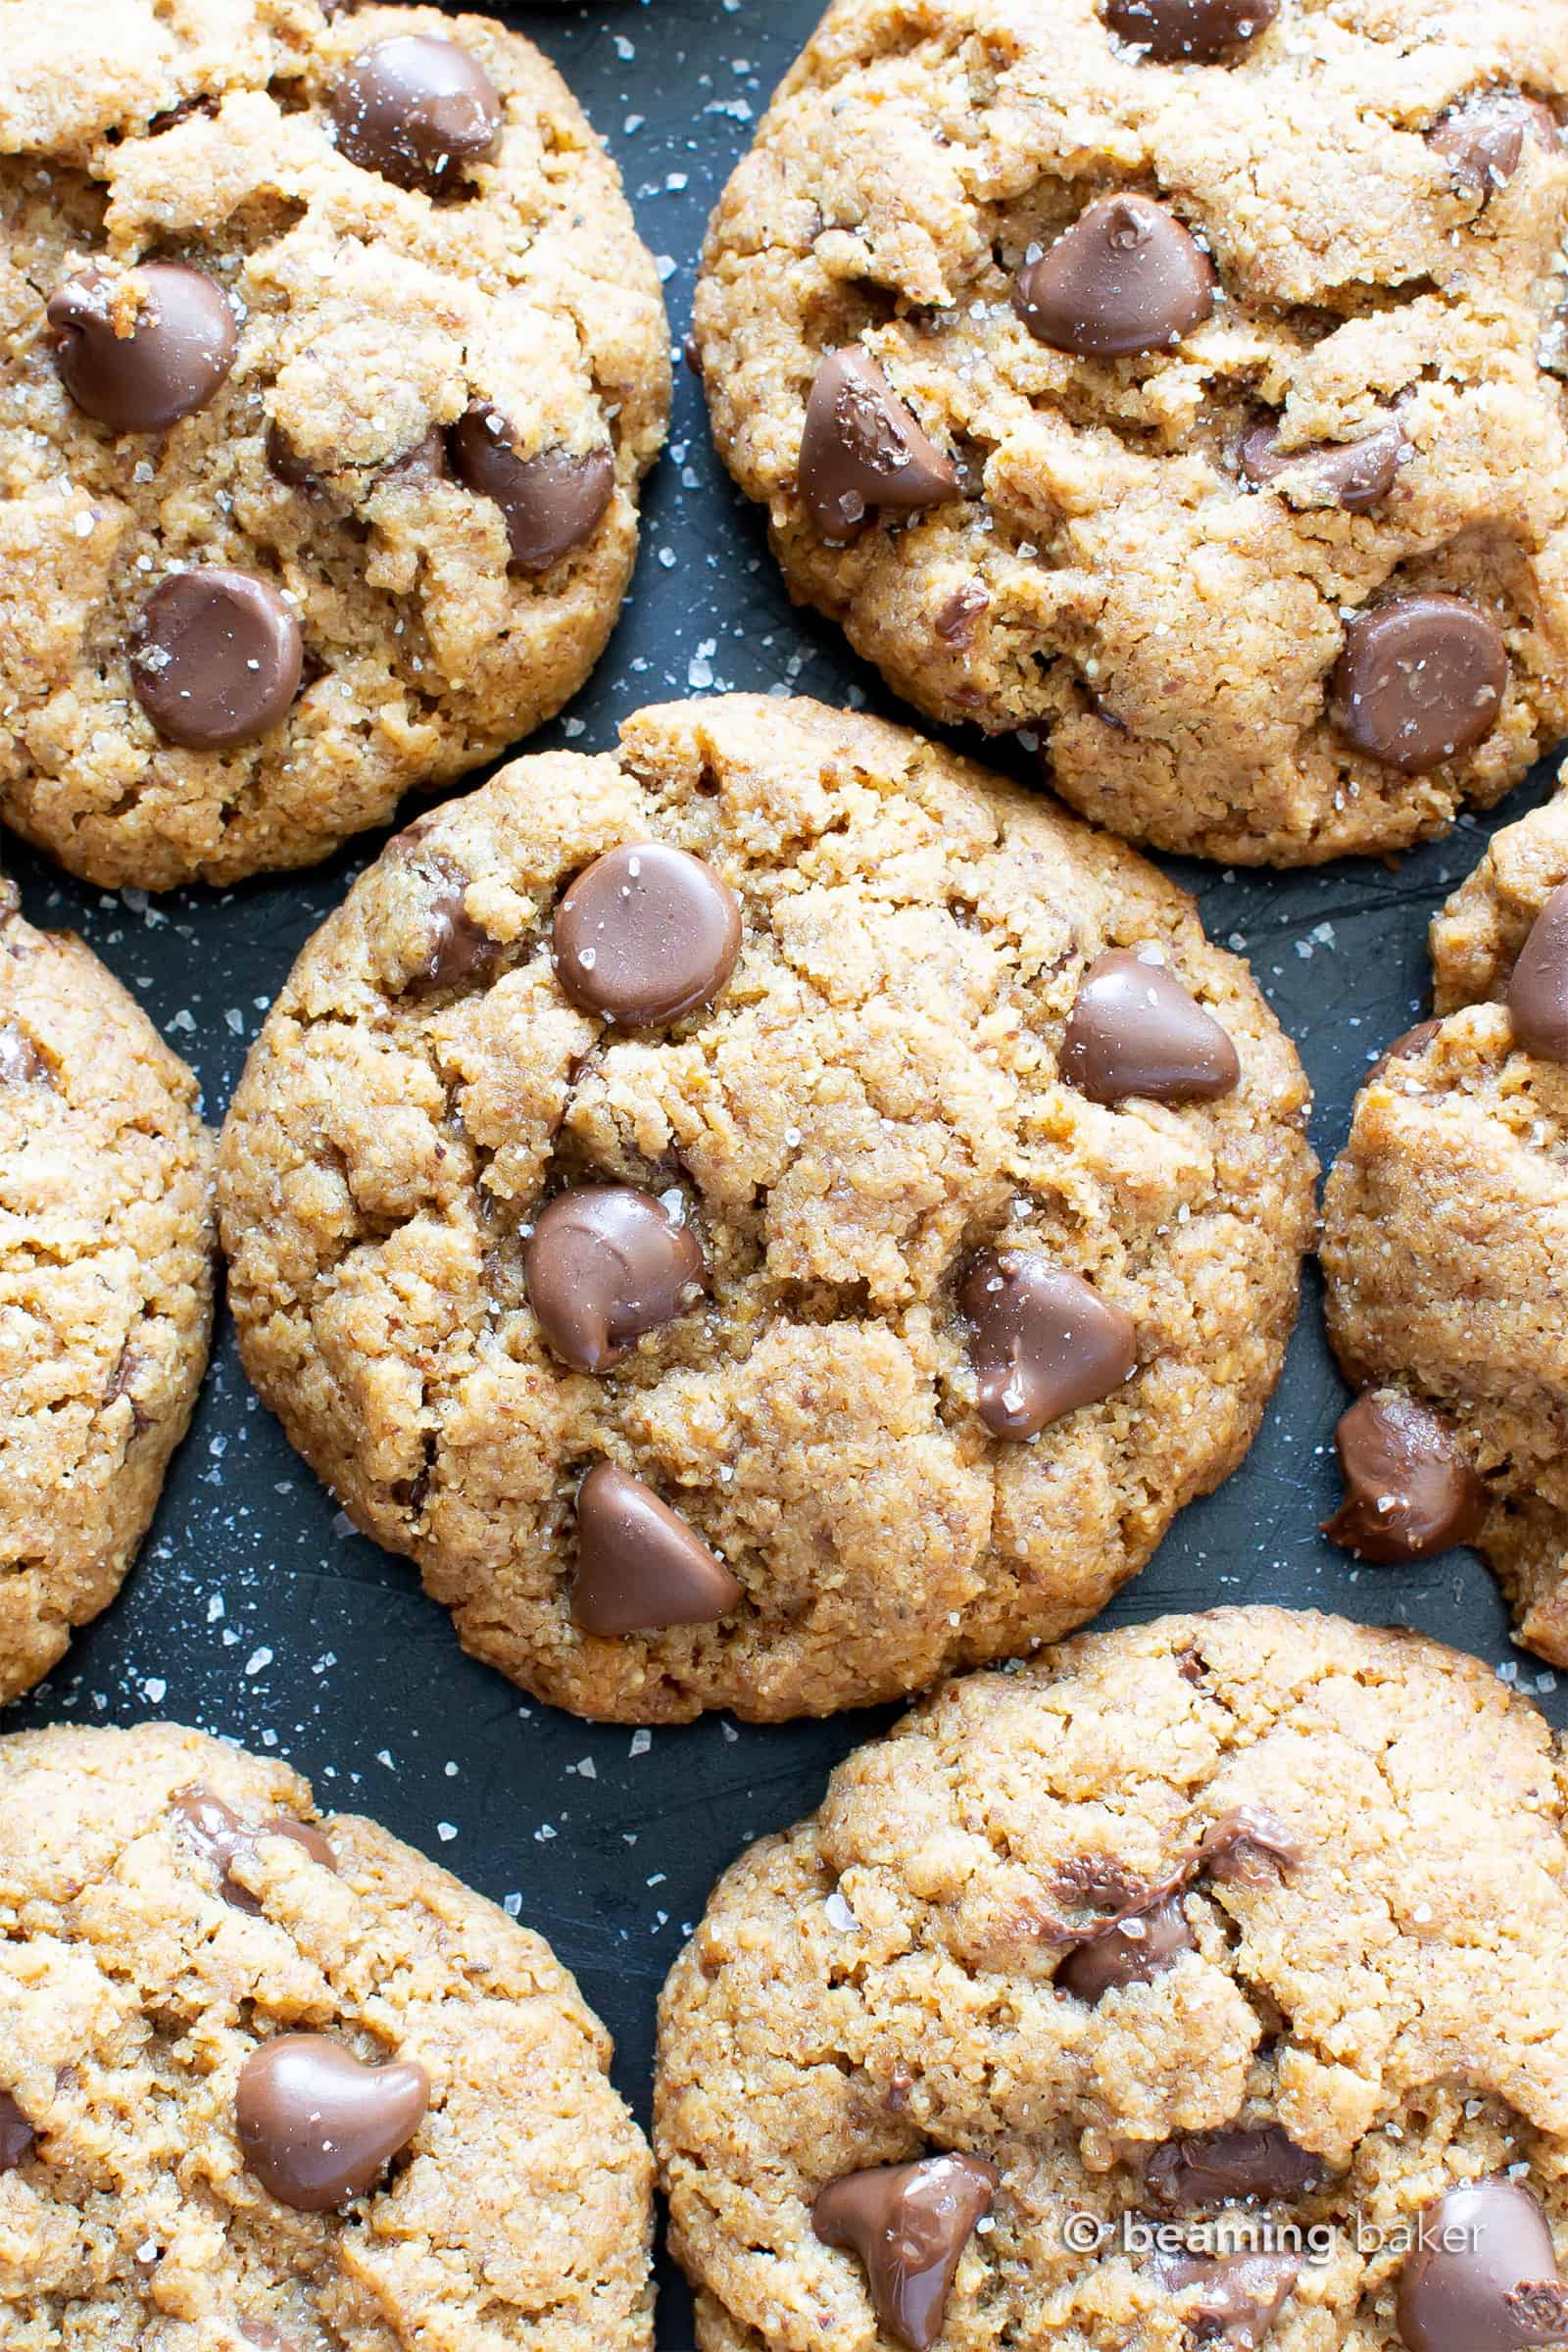 Salted Tahini Paleo Chocolate Chip Cookies (Coconut Flour): this gluten free chocolate chip cookies recipe is chewy, salty ‘n sweet! The best coconut flour chocolate chip cookies made with tahini butter! #Paleo #GlutenFree #Vegan #Cookies #GrainFree #Chocolate | Recipe at BeamingBaker.com